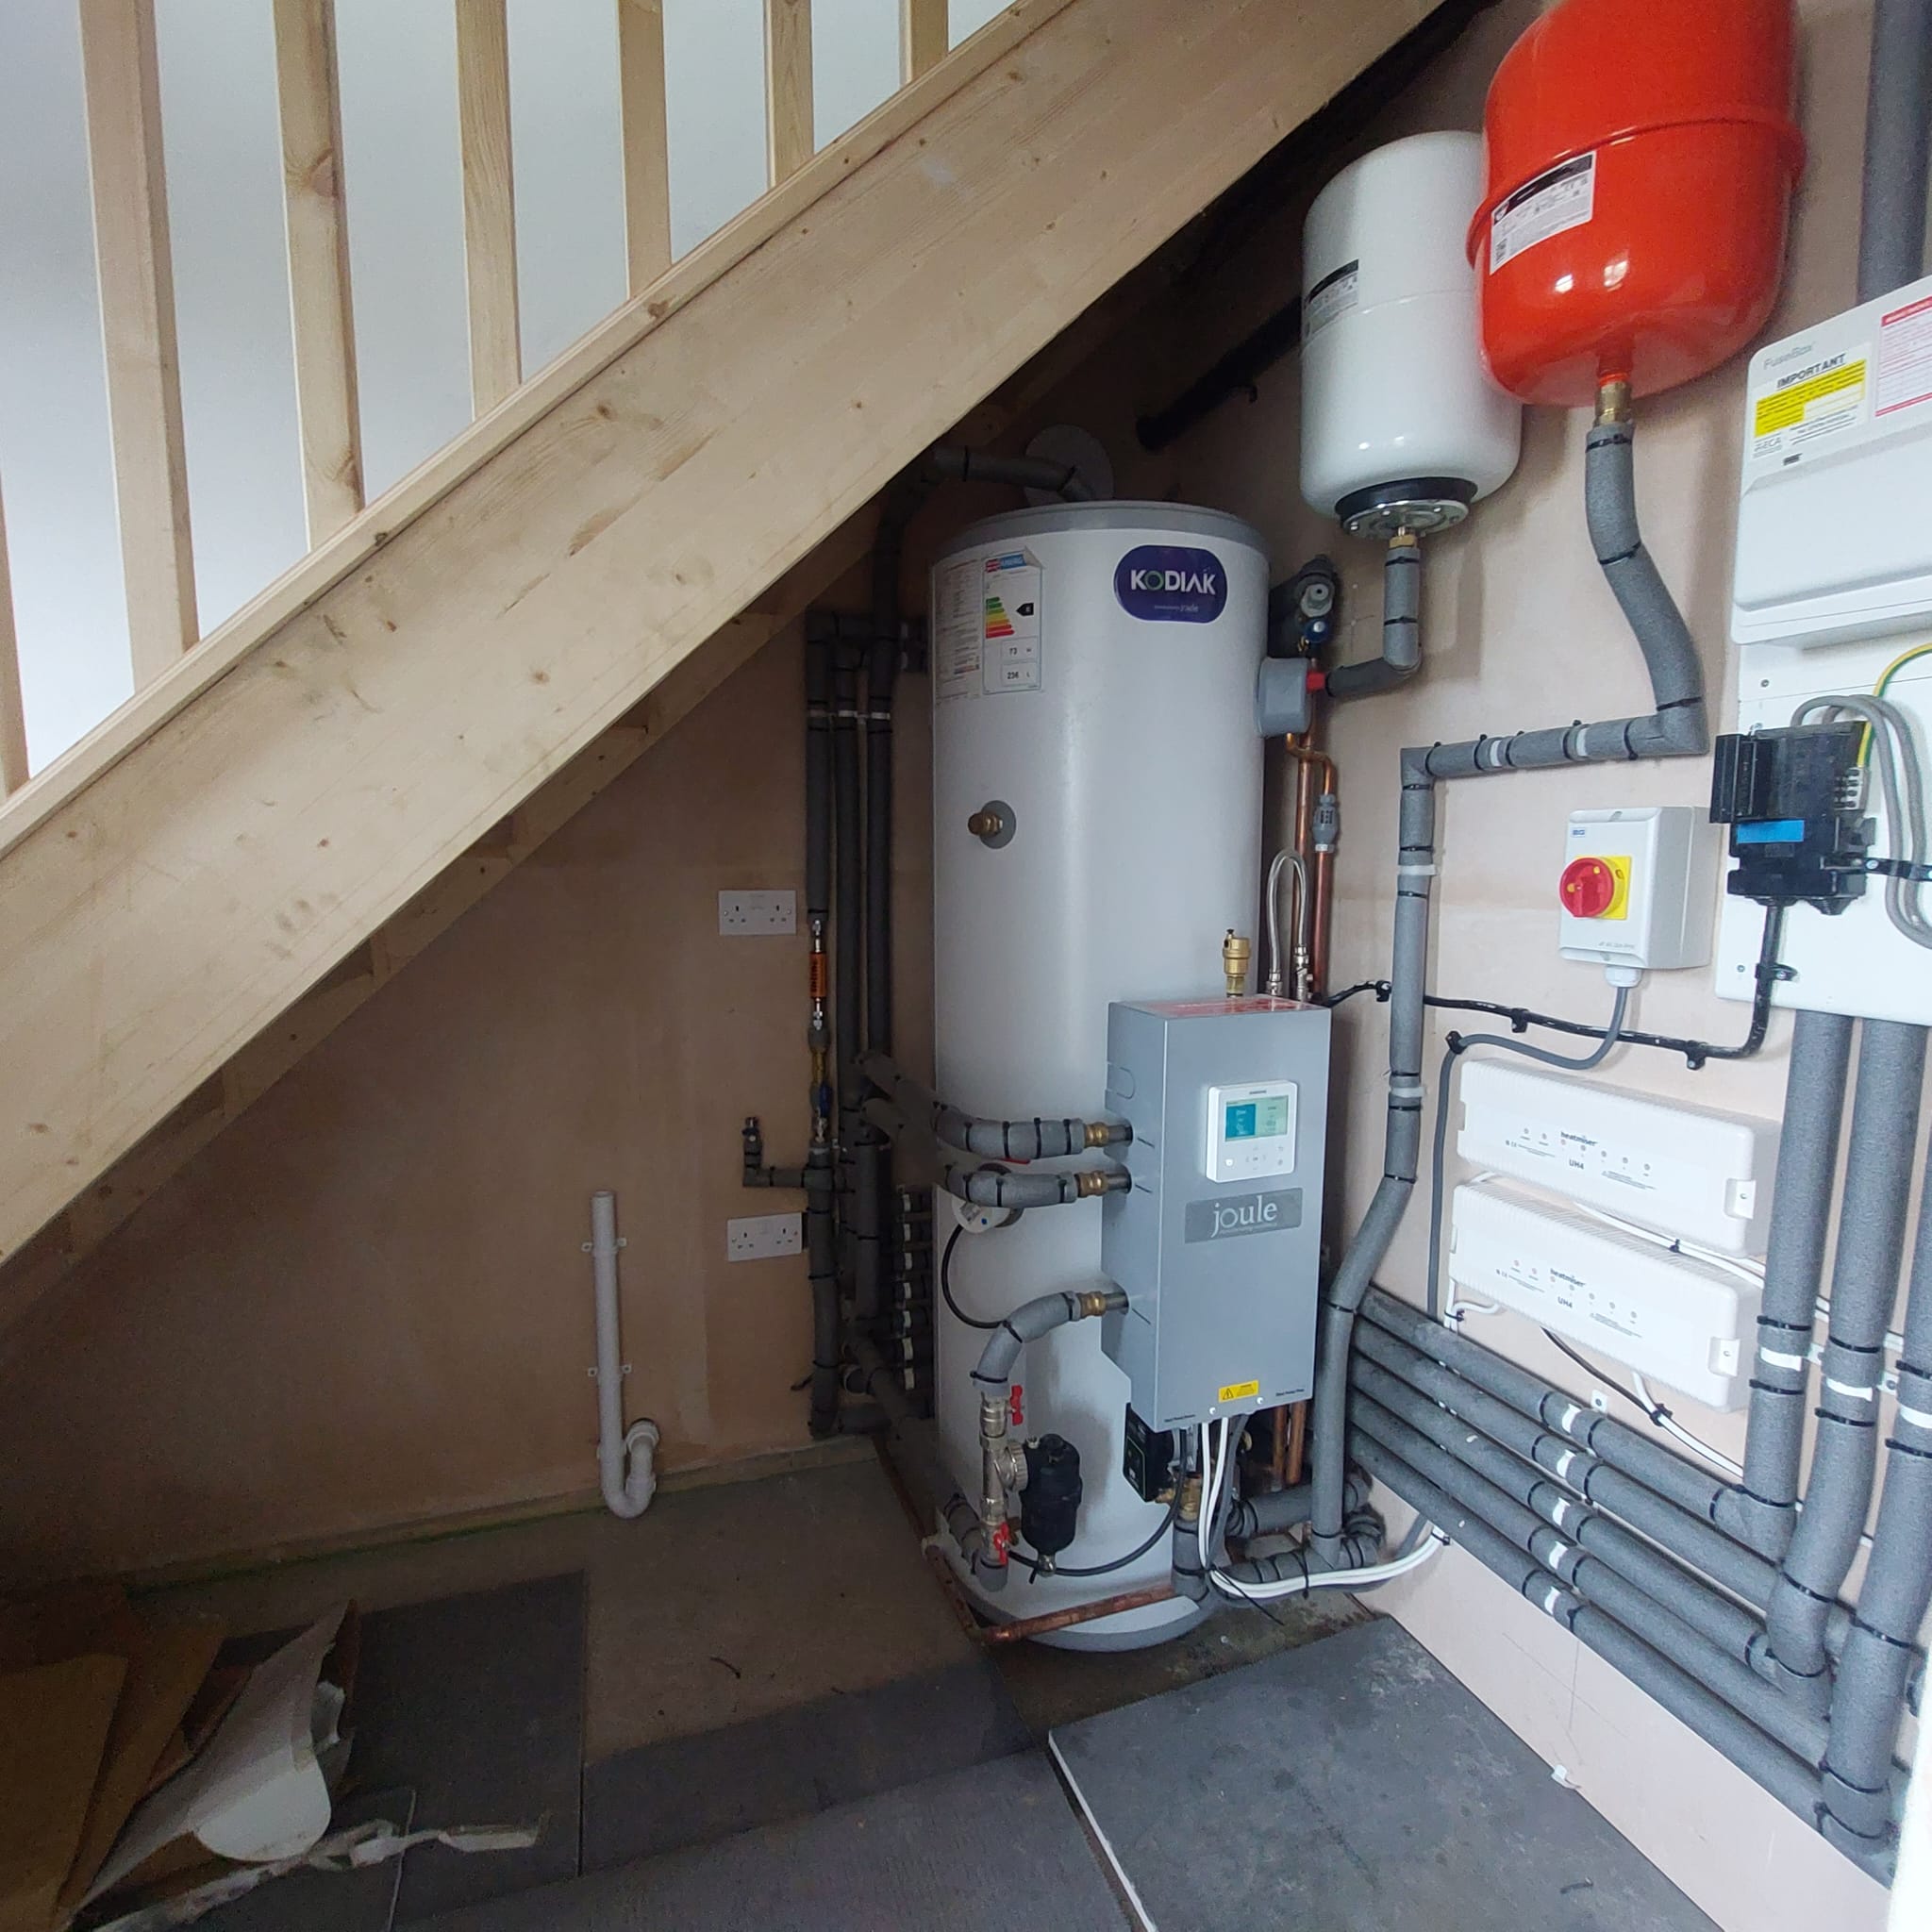 Air Source Heat Pump Installation By Transcrew Heating & Cooling Technologies Limited